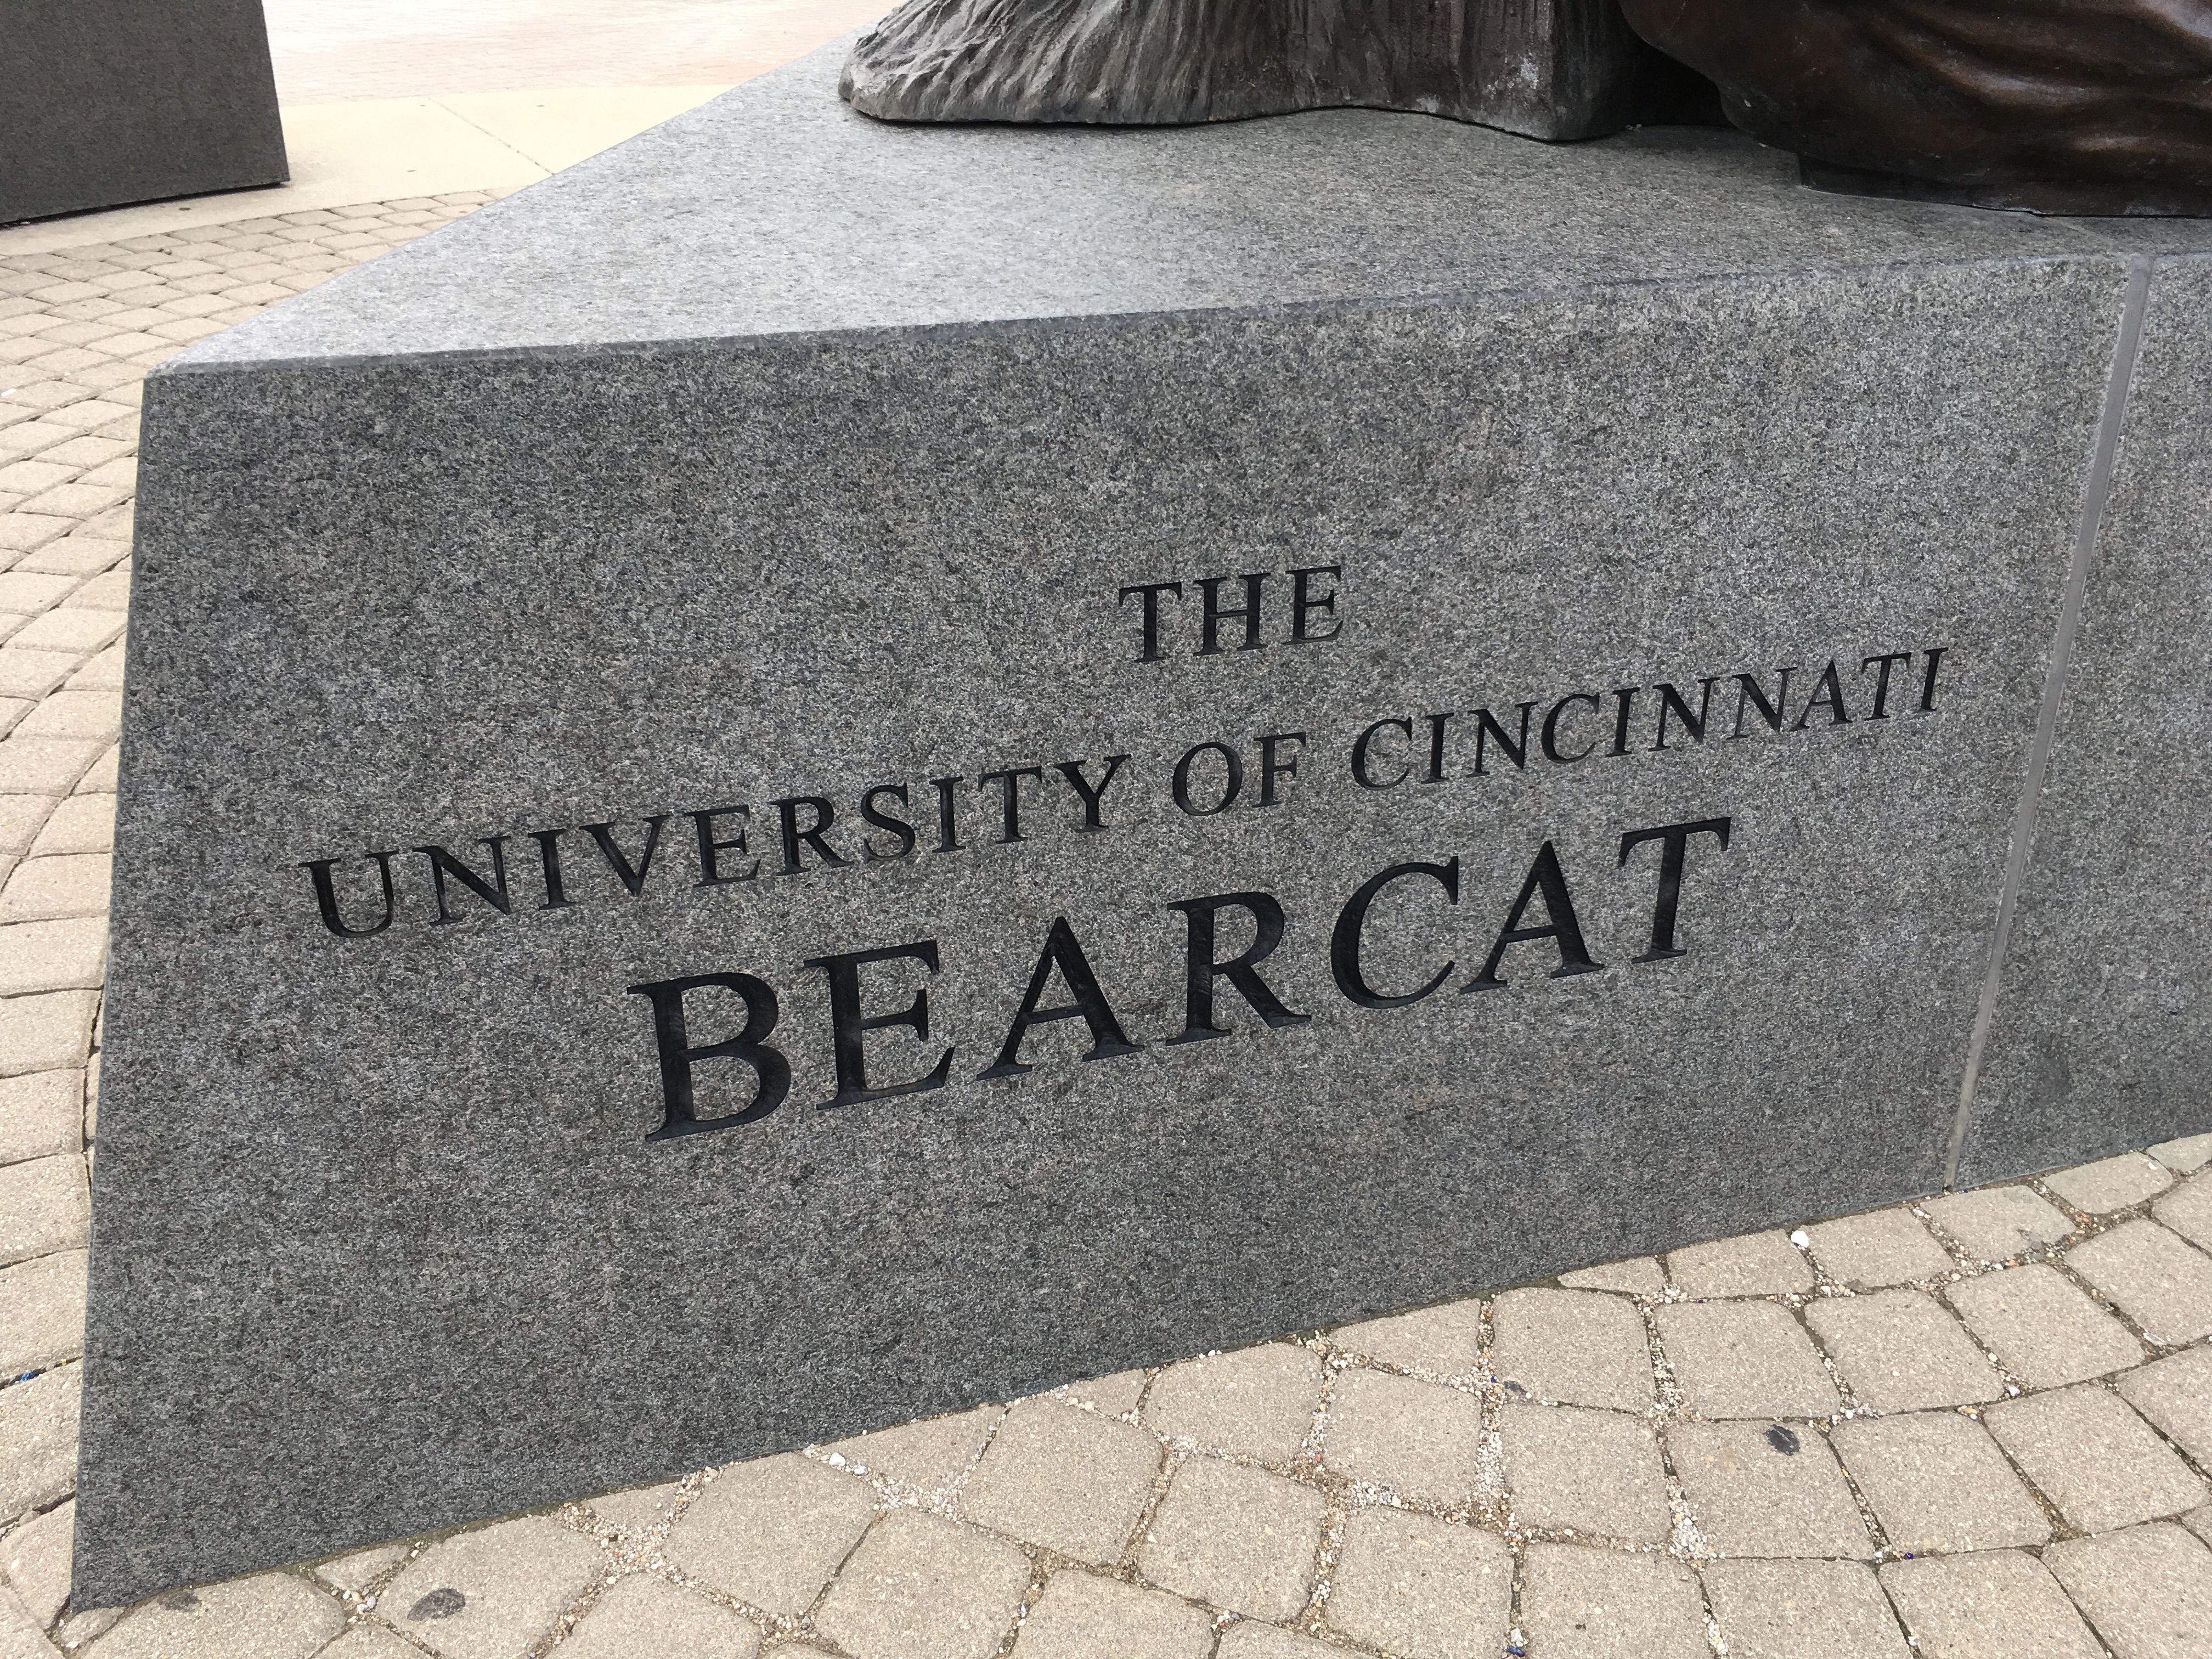 Photo of the title of the UC Bearcat